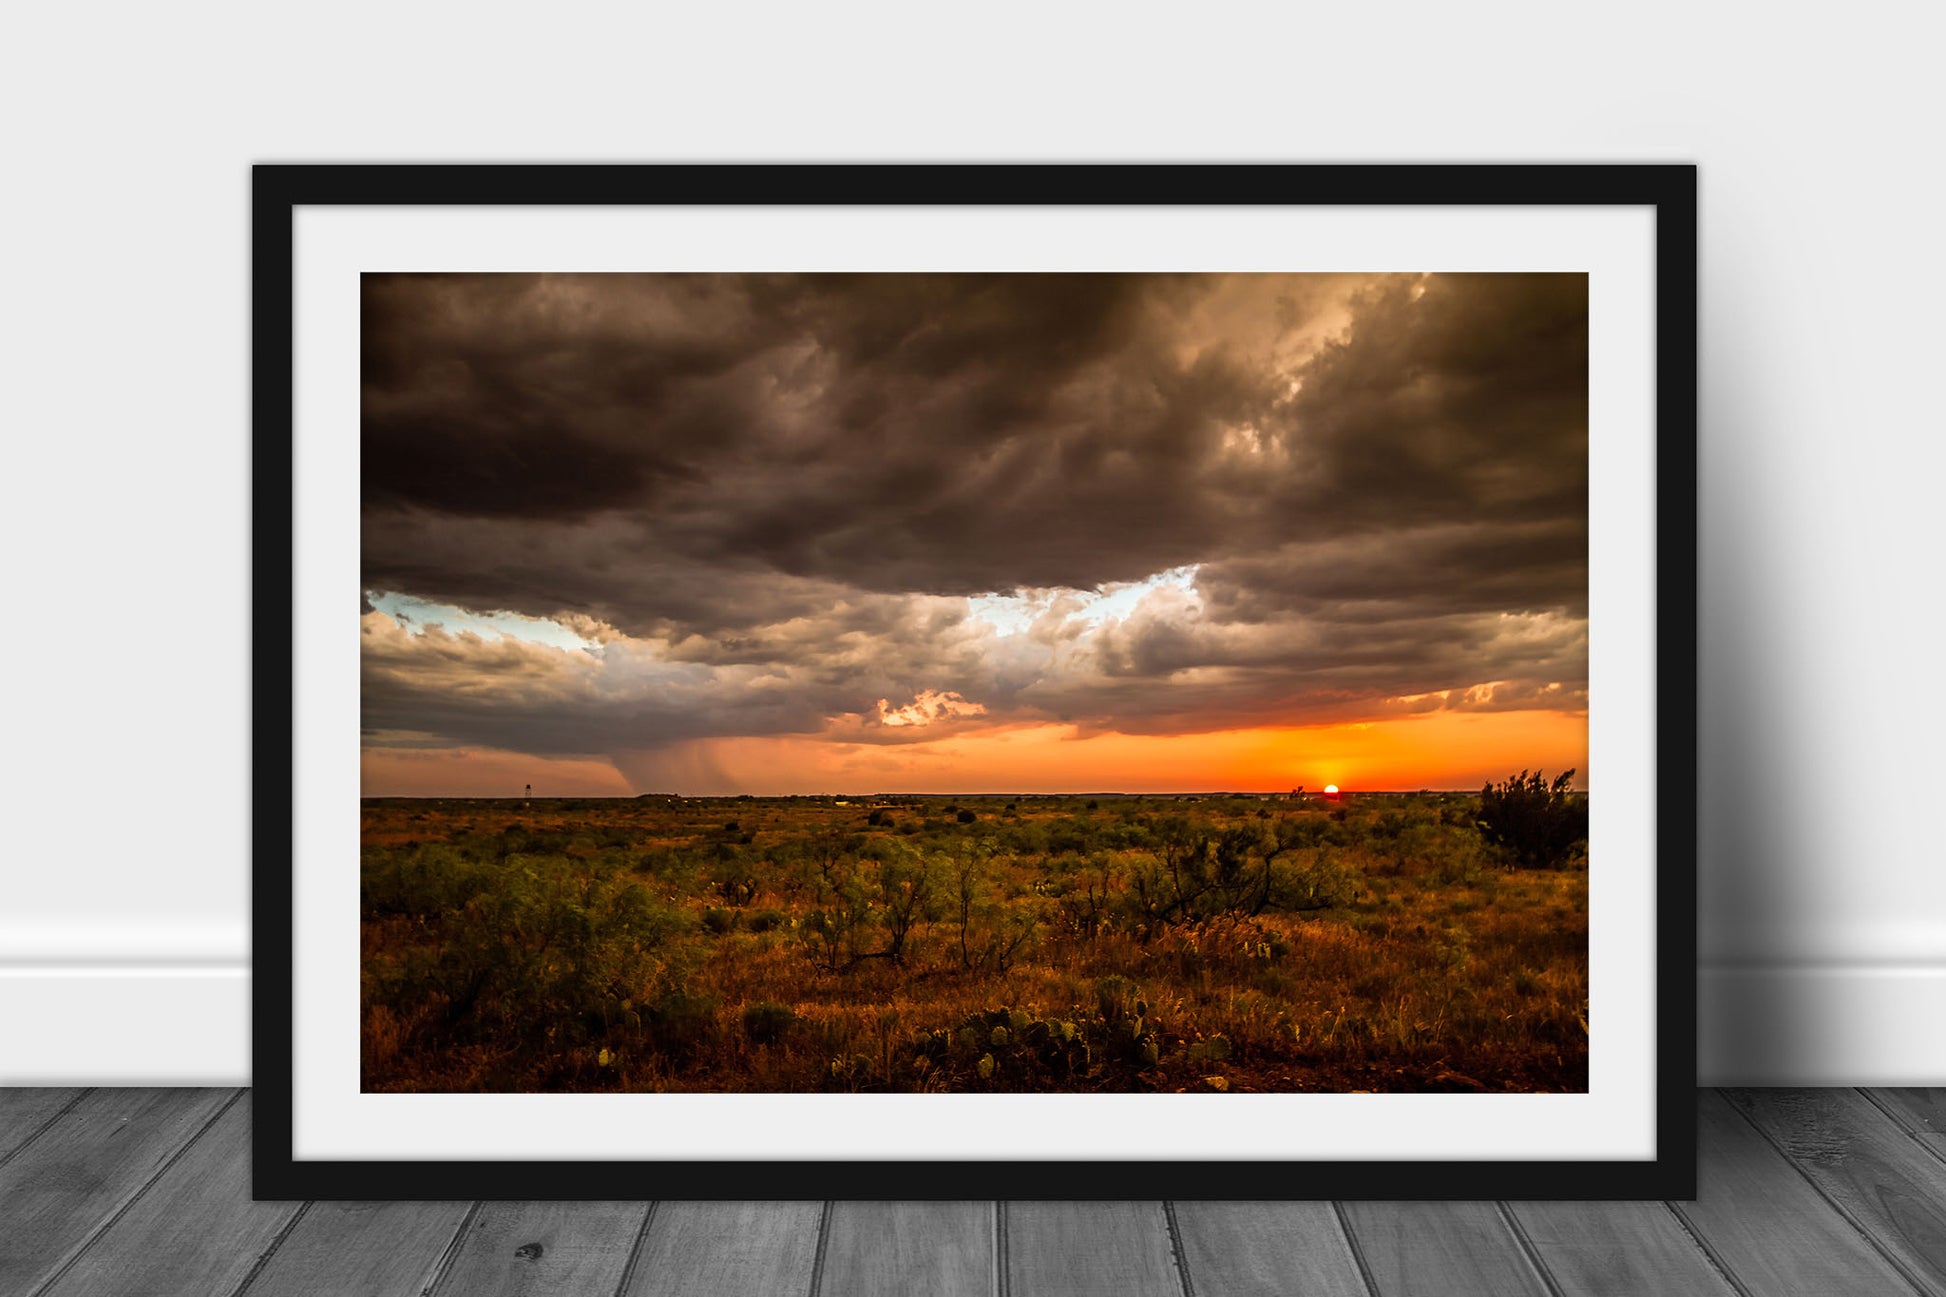 Framed western landscape print of a warm sunset taking place over cactus and mesquite bushes on a stormy spring evening in West Texas by Sean Ramsey of Southern Plains Photography.